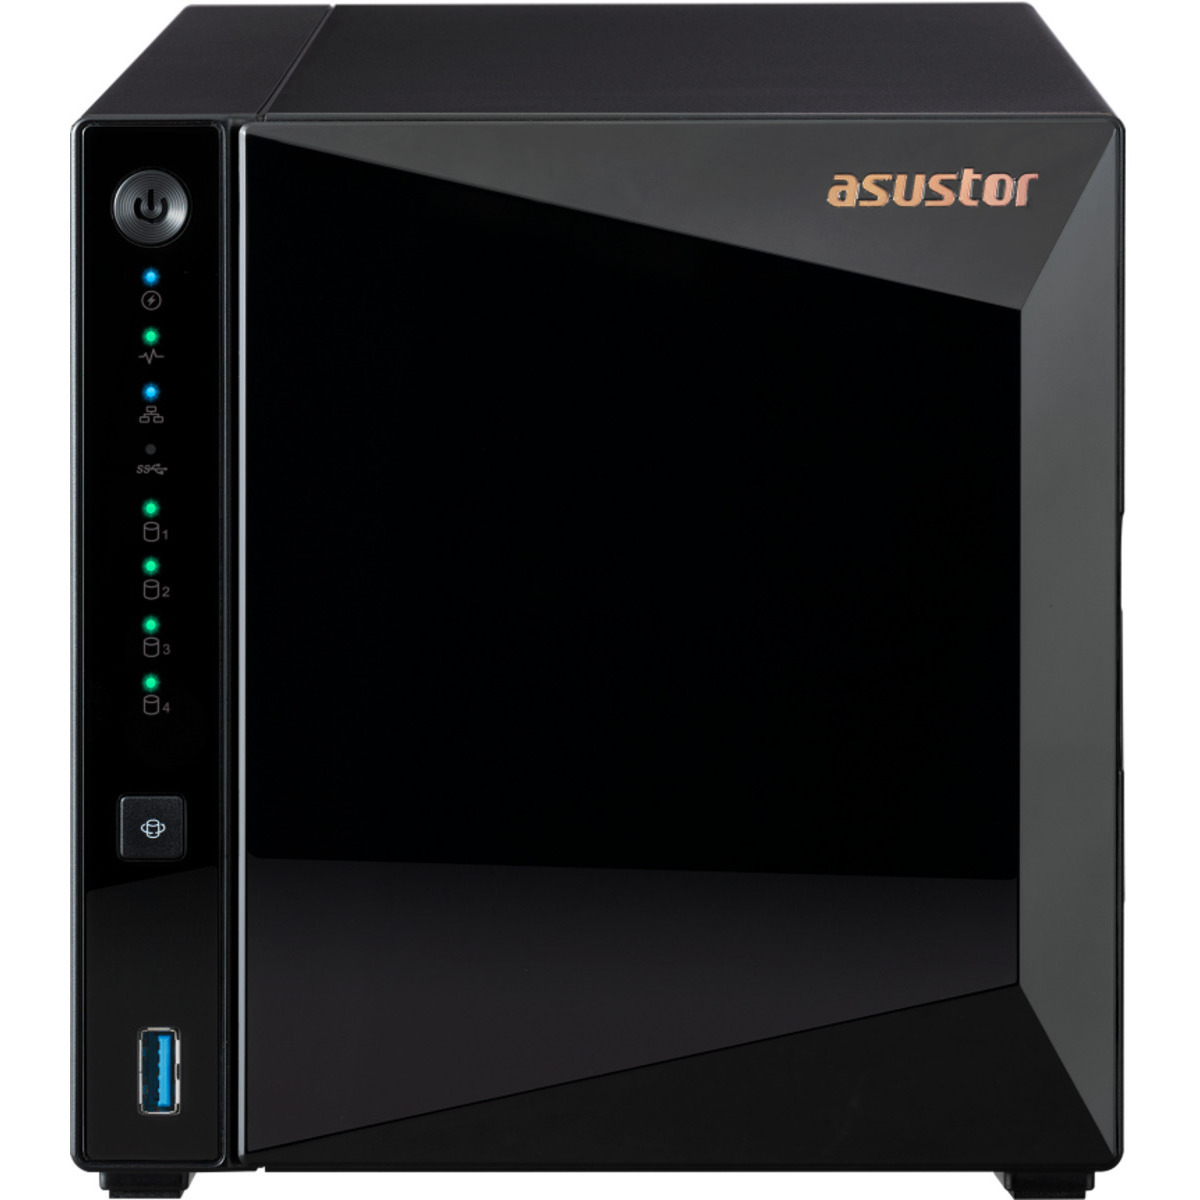 ASUSTOR DRIVESTOR 4 Pro Gen2 AS3304T v2 16tb 4-Bay Desktop Personal / Basic Home / Small Office NAS - Network Attached Storage Device 4x4tb Sandisk Ultra 3D SDSSDH3-4T00 2.5 560/520MB/s SATA 6Gb/s SSD CONSUMER Class Drives Installed - Burn-In Tested - ON SALE DRIVESTOR 4 Pro Gen2 AS3304T v2